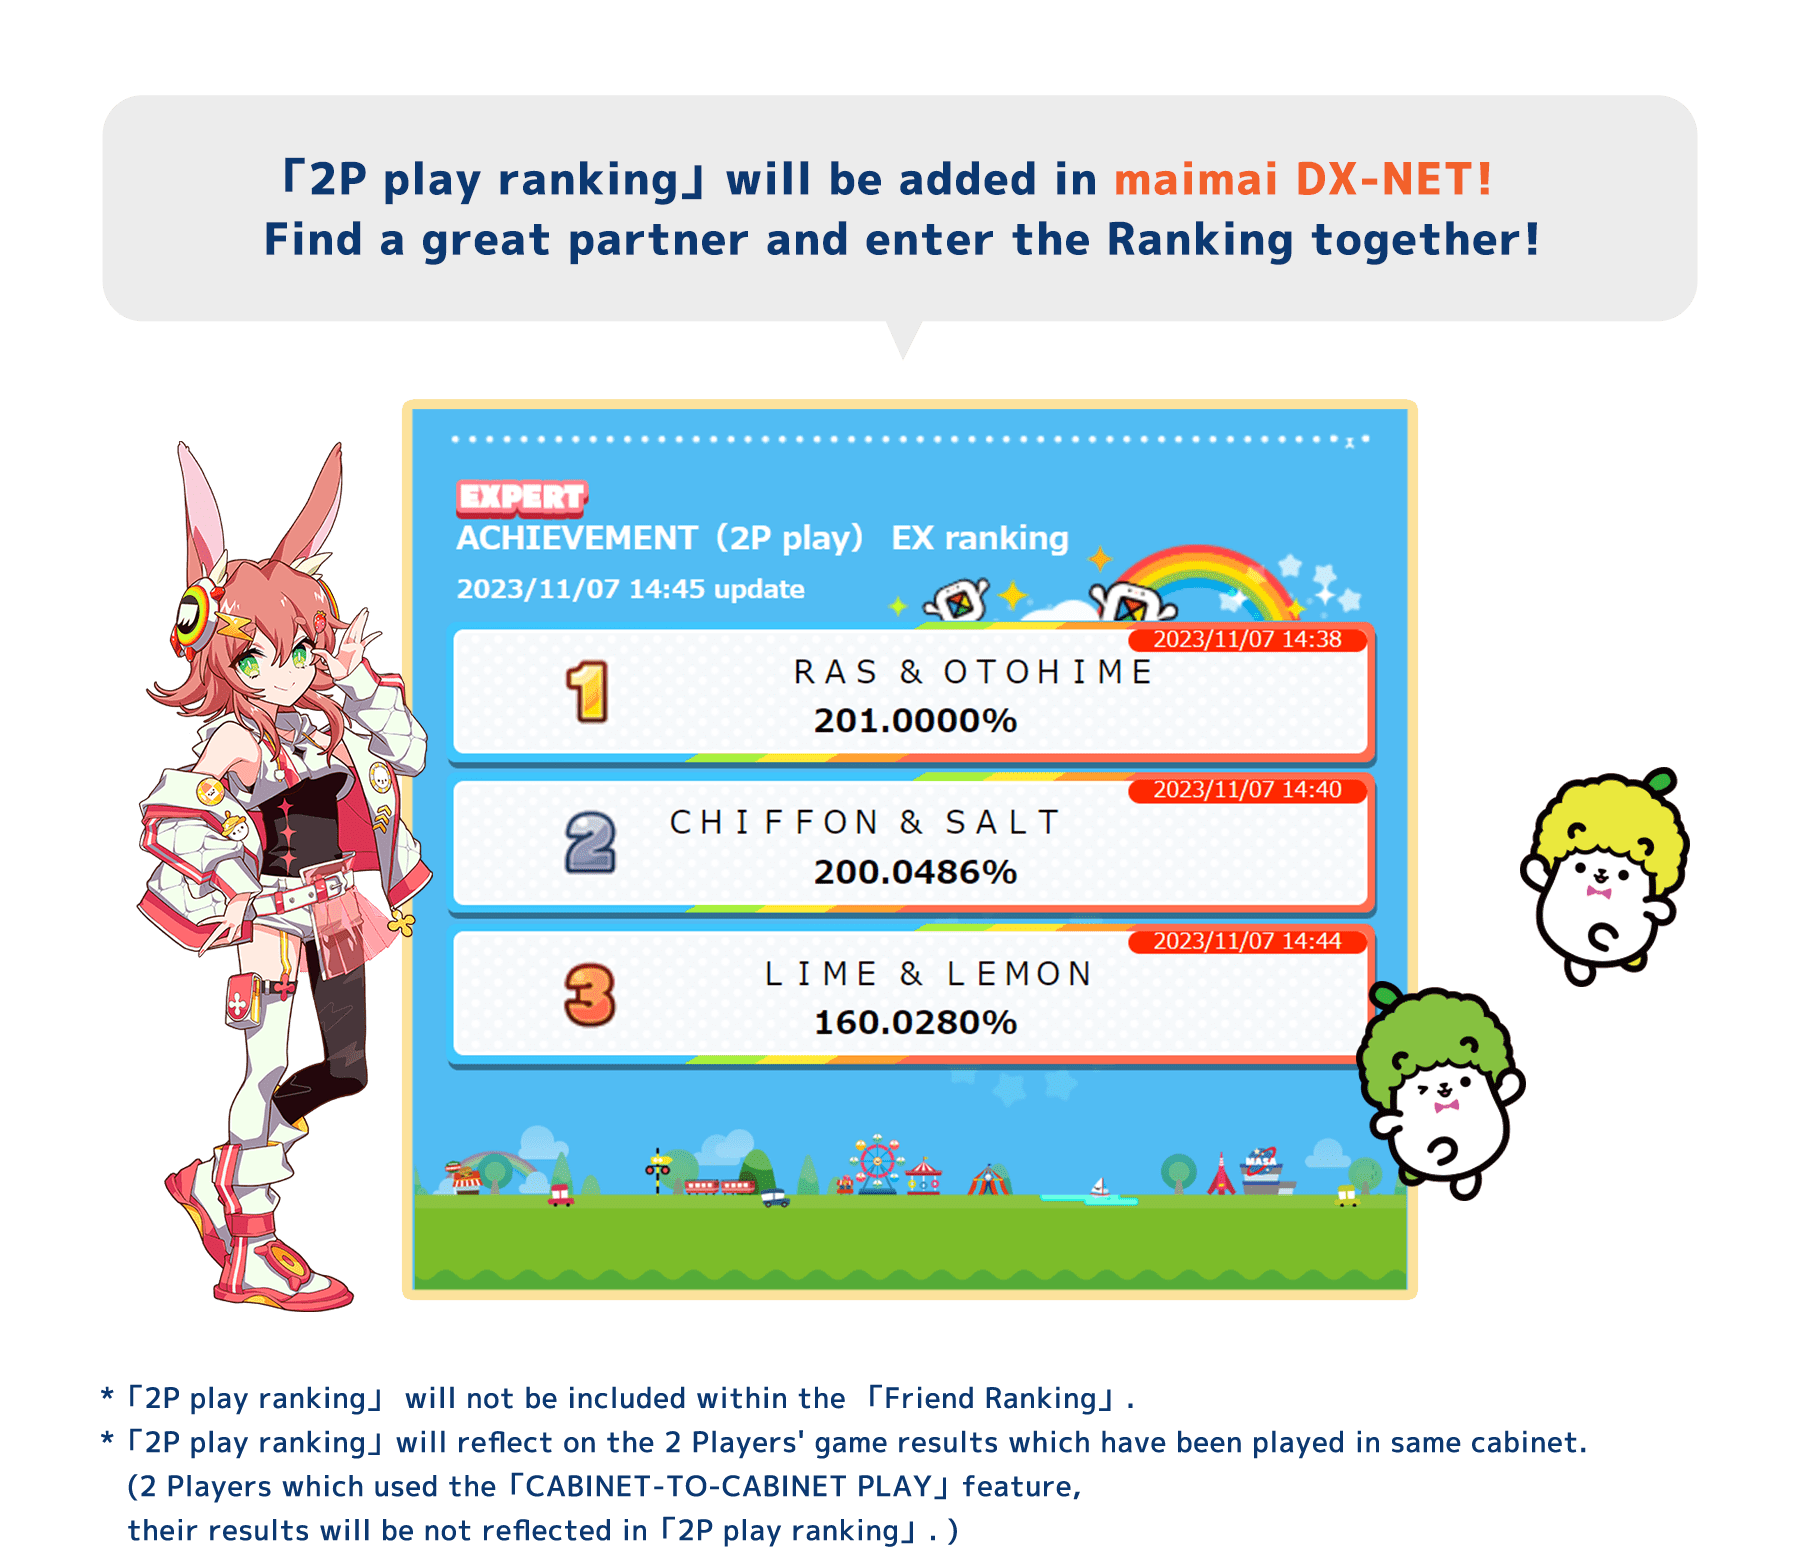 「2P play ranking」will be added in maimai DX-NET!
          Find a great partner and enter the Ranking together!
          *「2P play ranking」 will not be included within the 「Friend Ranking」.
          *「2P play ranking」will reflect on the 2 Players' game results which have been played in same cabinet.(2 Players which used the「CABINET-TO-CABINET PLAY」feature, their results will be not reflected in「2P play ranking」.)